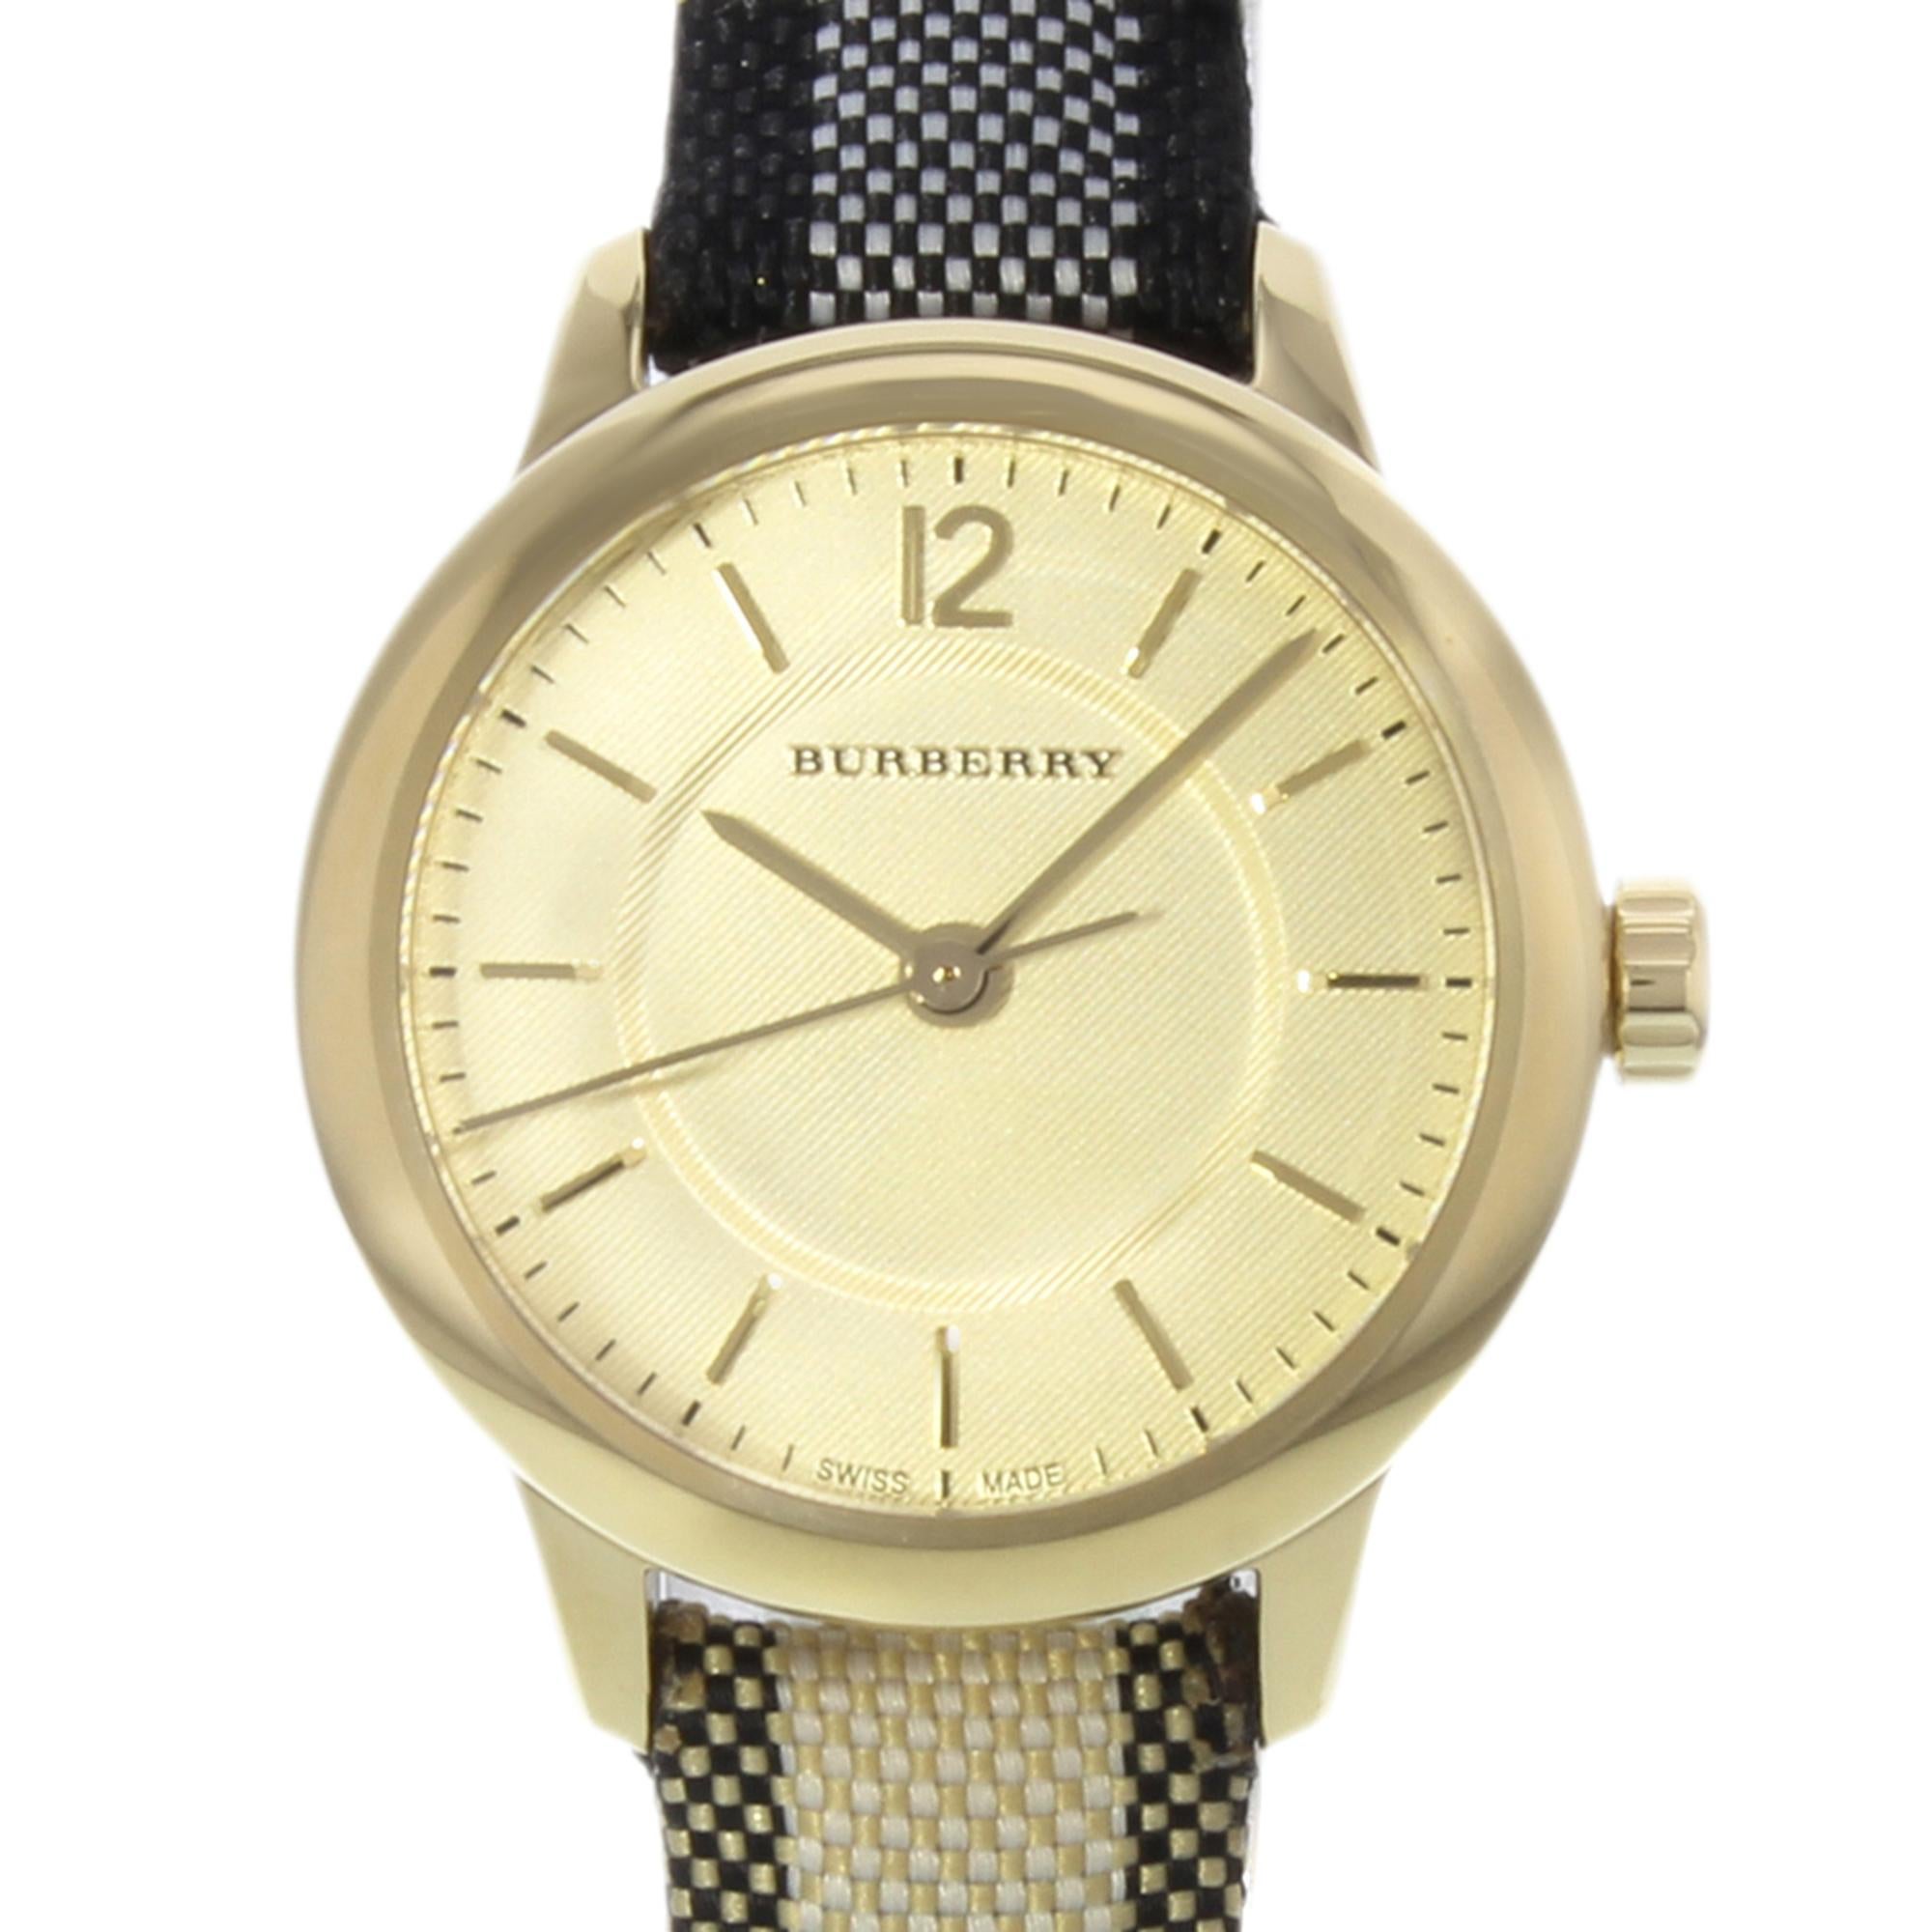 This display model Burberry BU10201 is a beautiful Ladies timepiece that is powered by a quartz movement which is cased in a stainless steel case. It has a round shape face, no features dial and has hand sticks style markers. It is completed with a